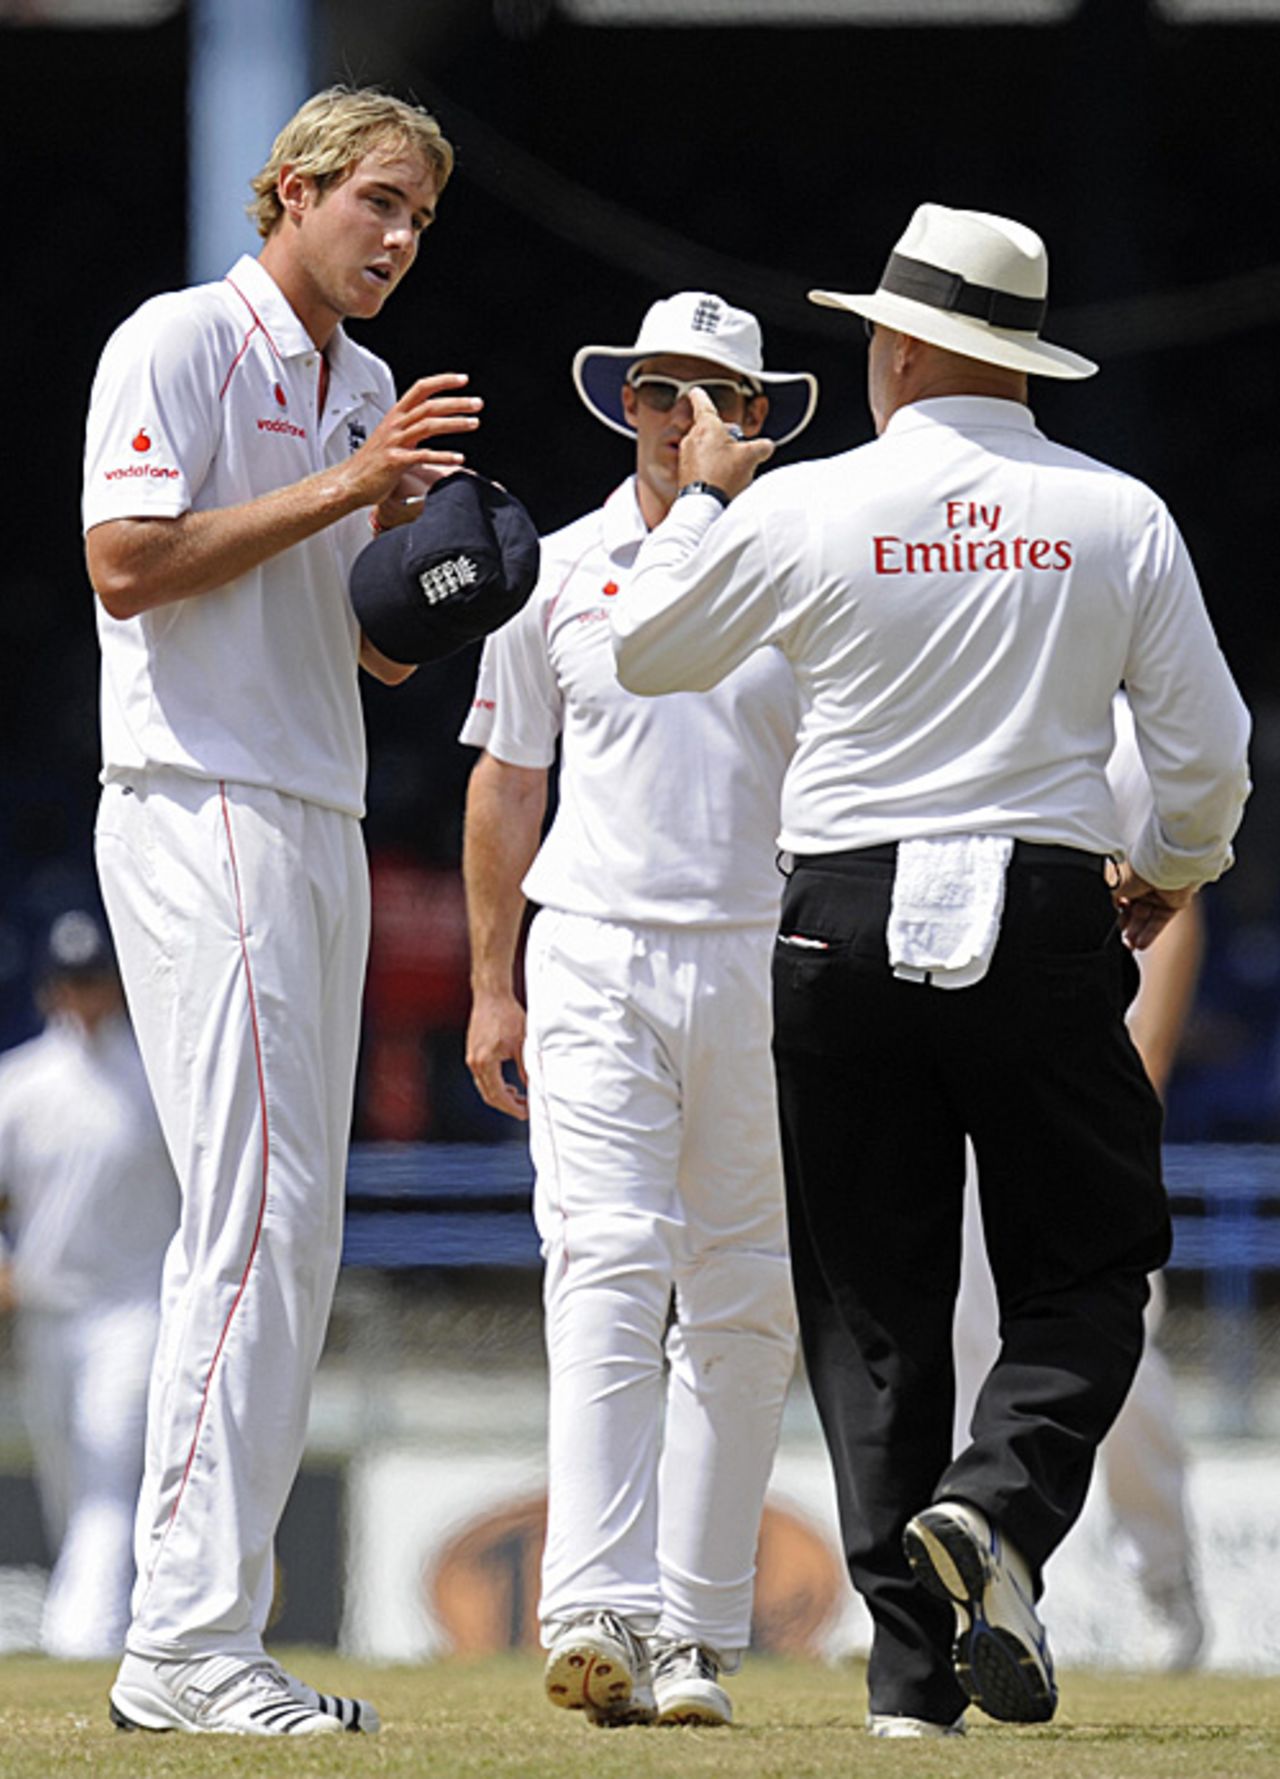 Stuart Broad is given a talking to by Daryl Harper, West Indies v England, 5th Test, Trinidad, March 9, 2009